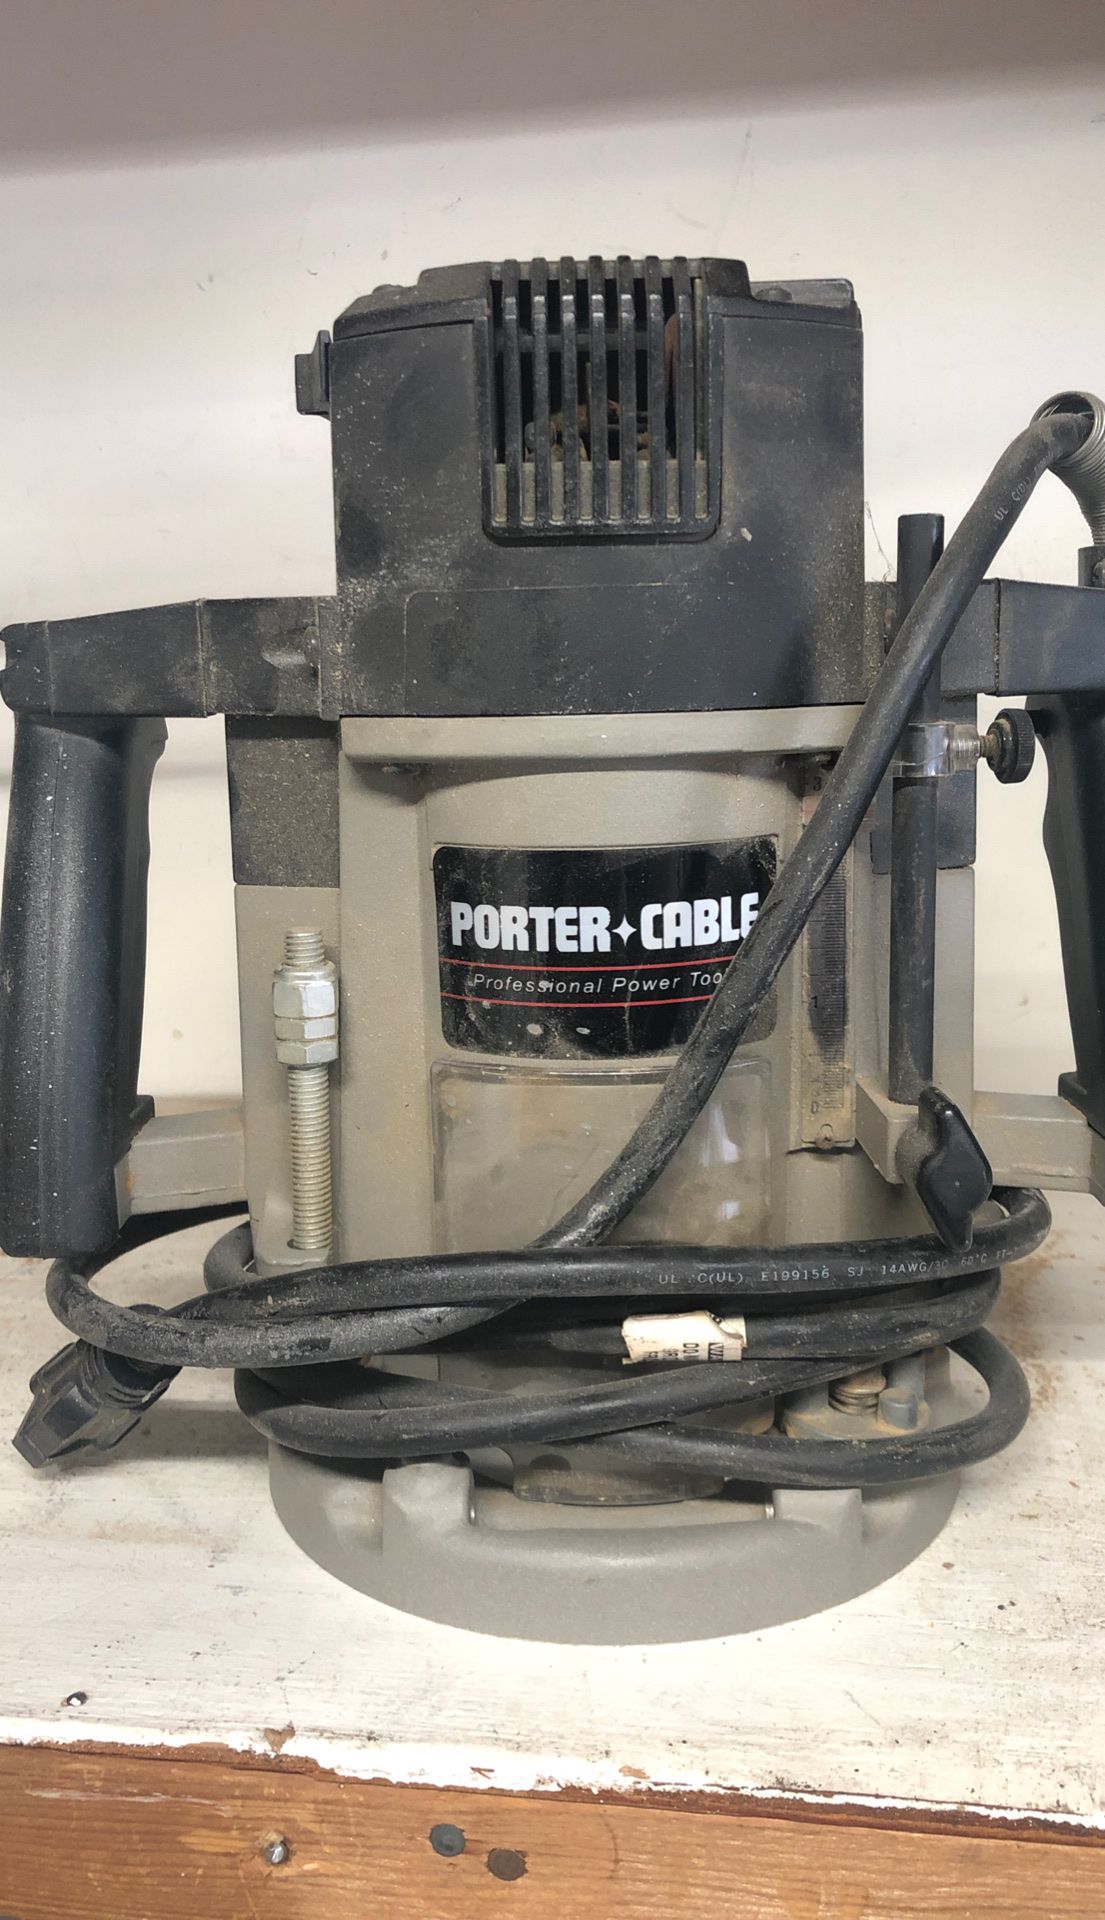 Porter Cable router model 7539